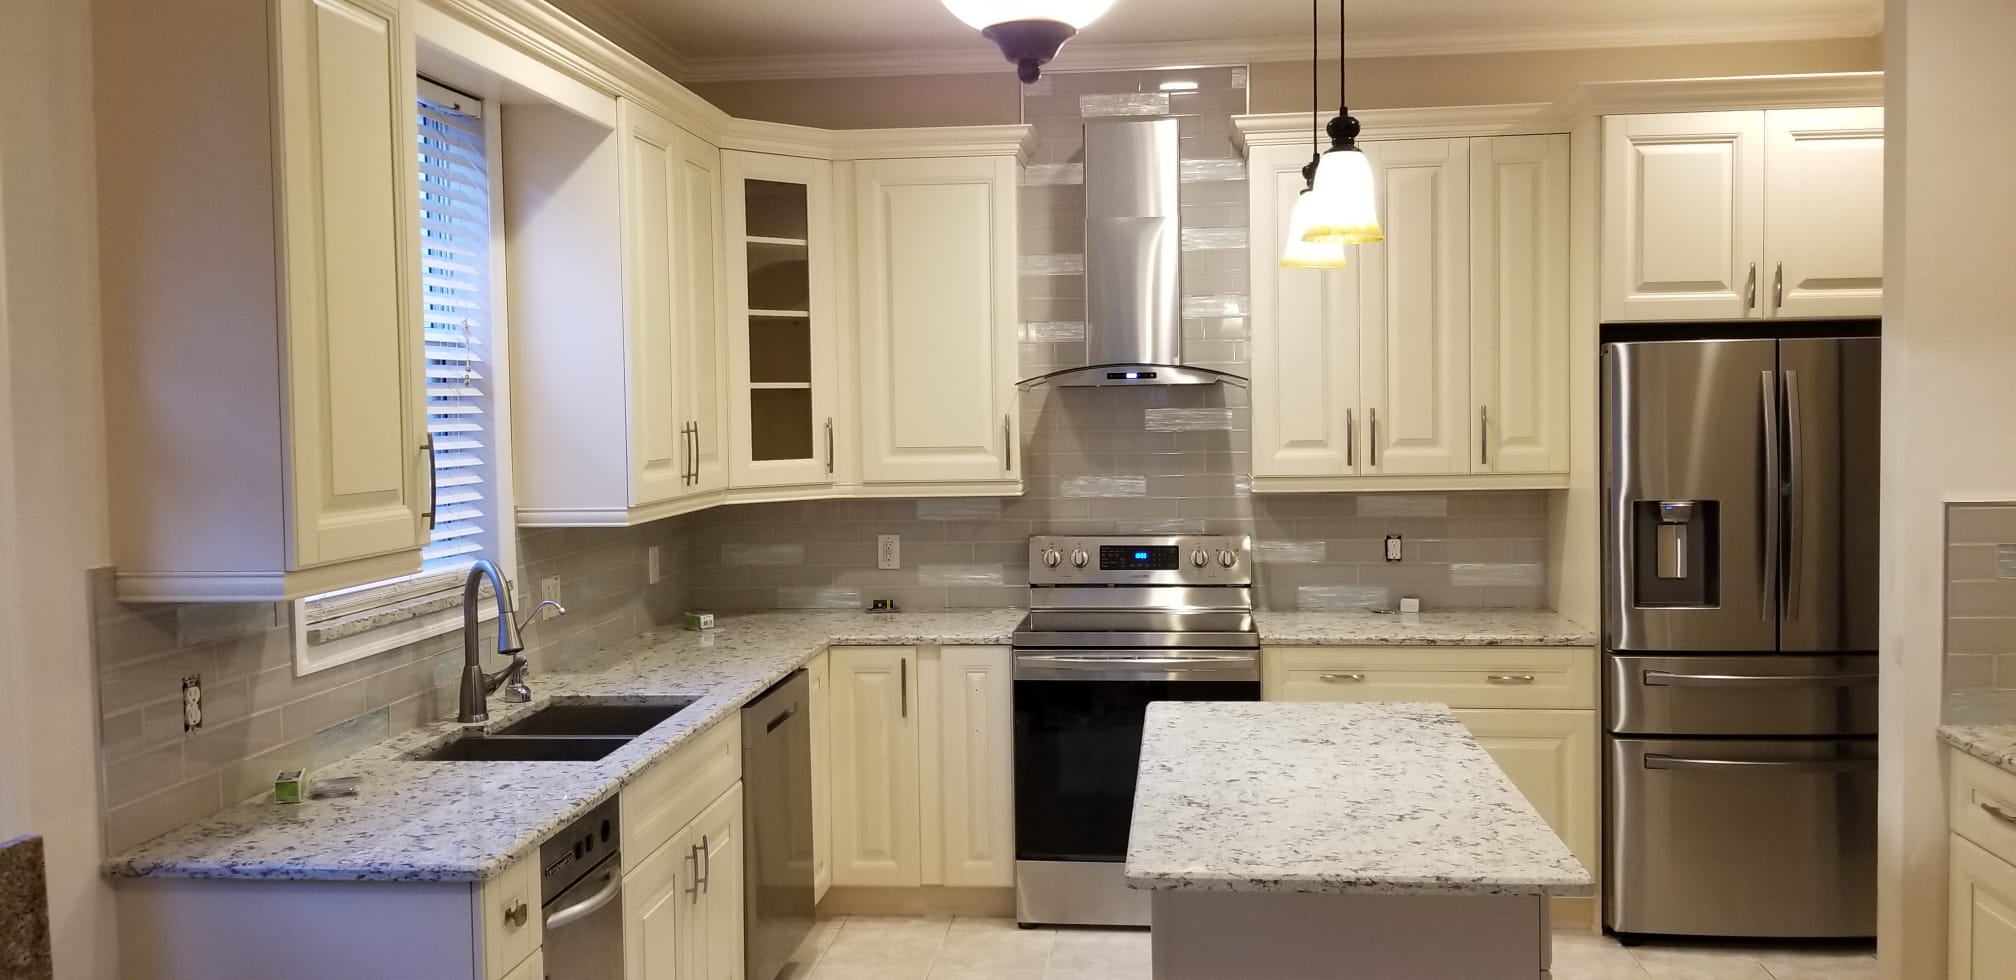 Beautiful, brightly lit, clean kitchen with new appliances